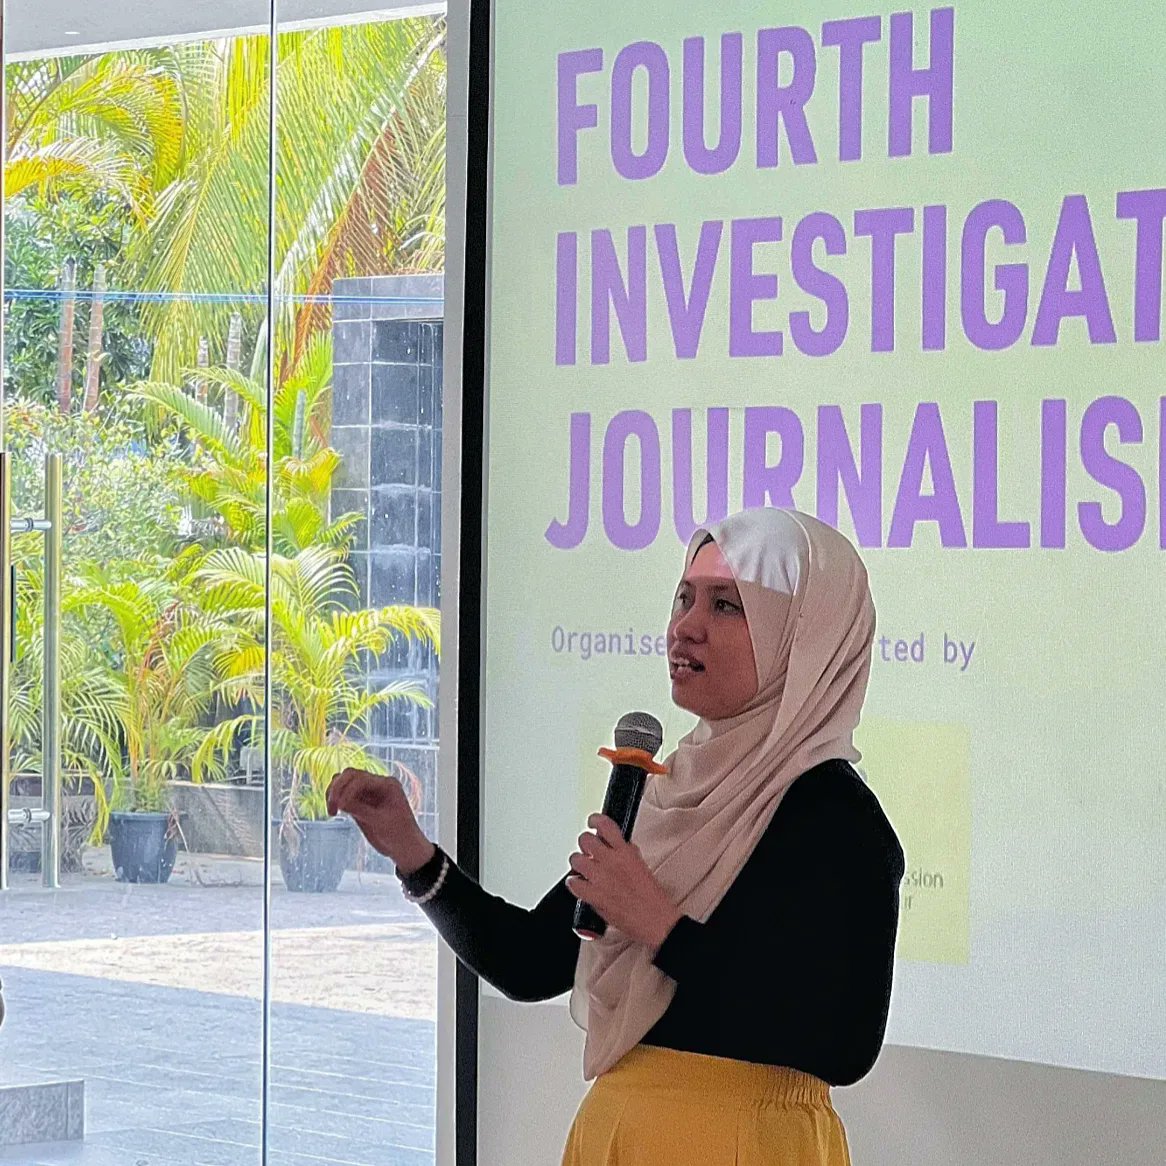 MCCHR's Firdaus Husni speaks at The Fourth Investigative Journalism Summit last Saturday about the work of MCCHR through strategic litigation, the role of media in supporting strategic litigation to bring about change, and more. Thank you @TheFourth_media for having us!